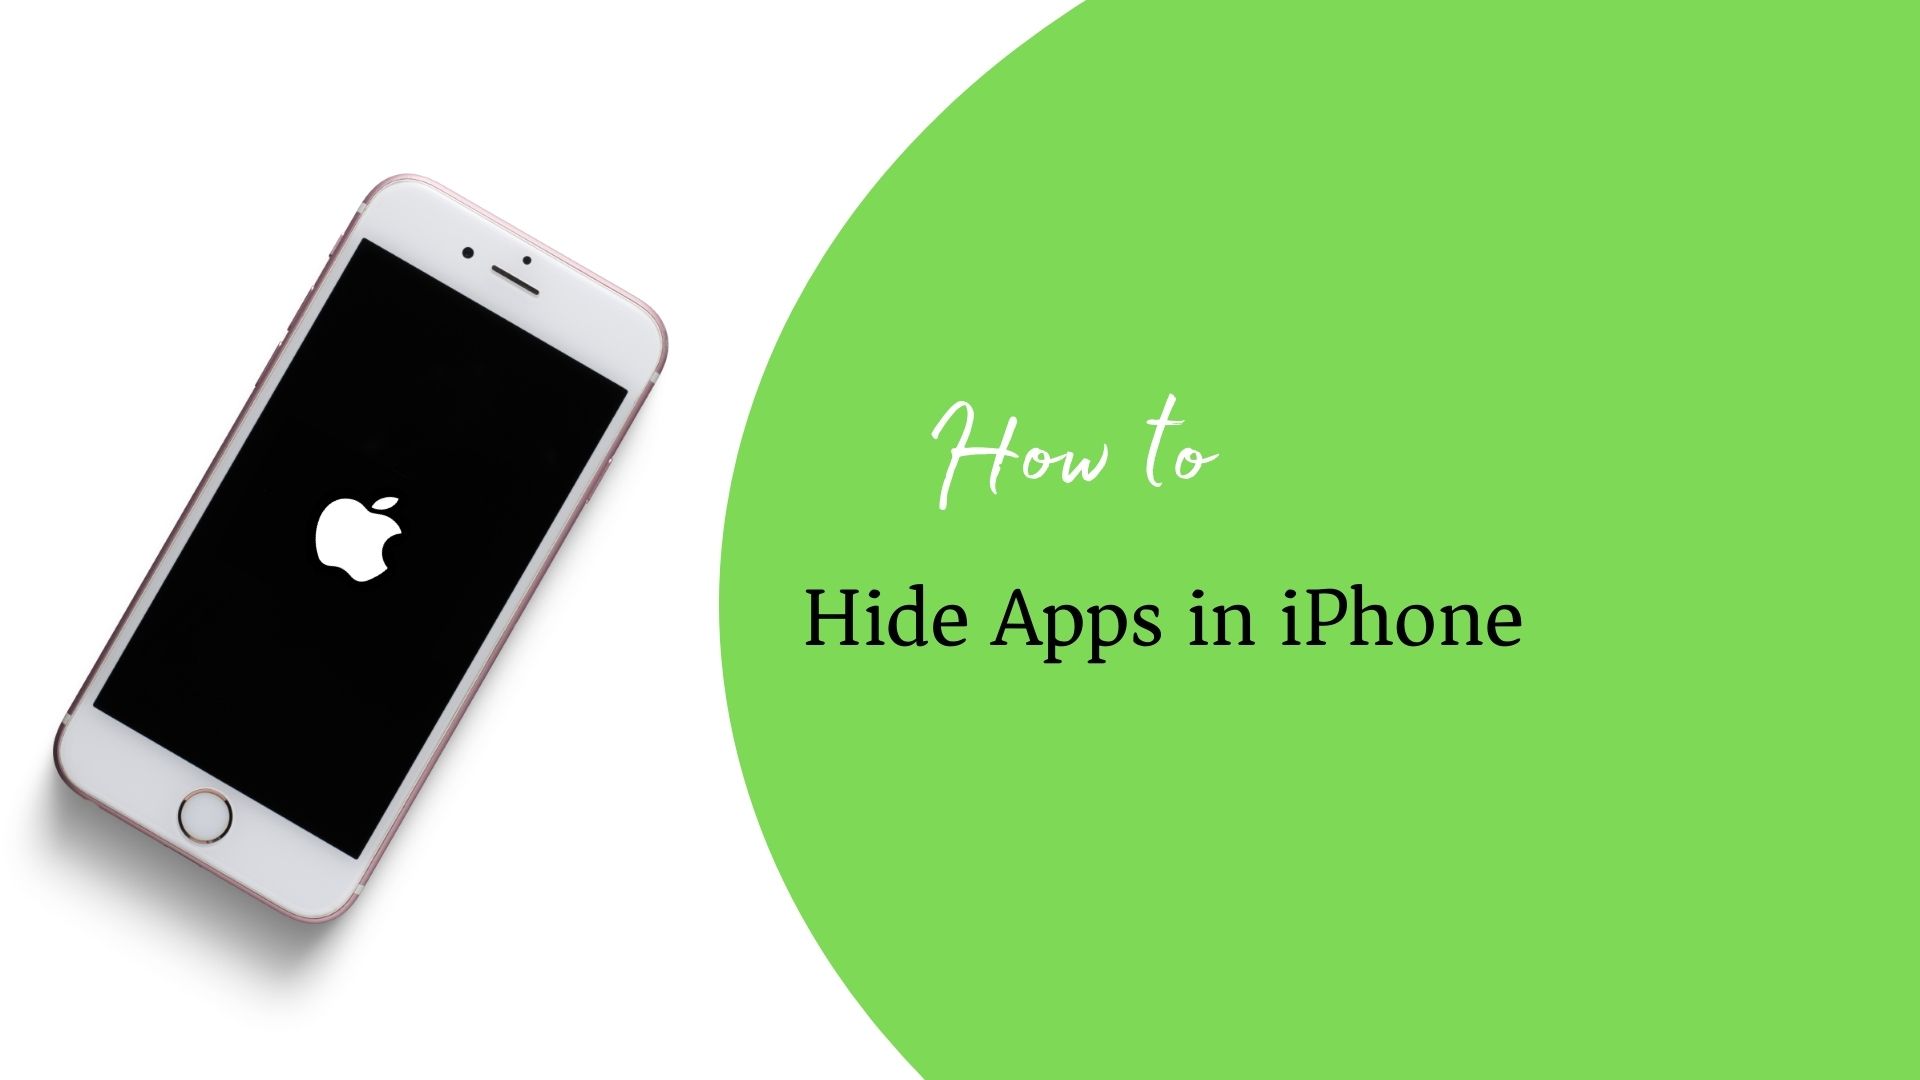 How to Hide Apps in iPhone